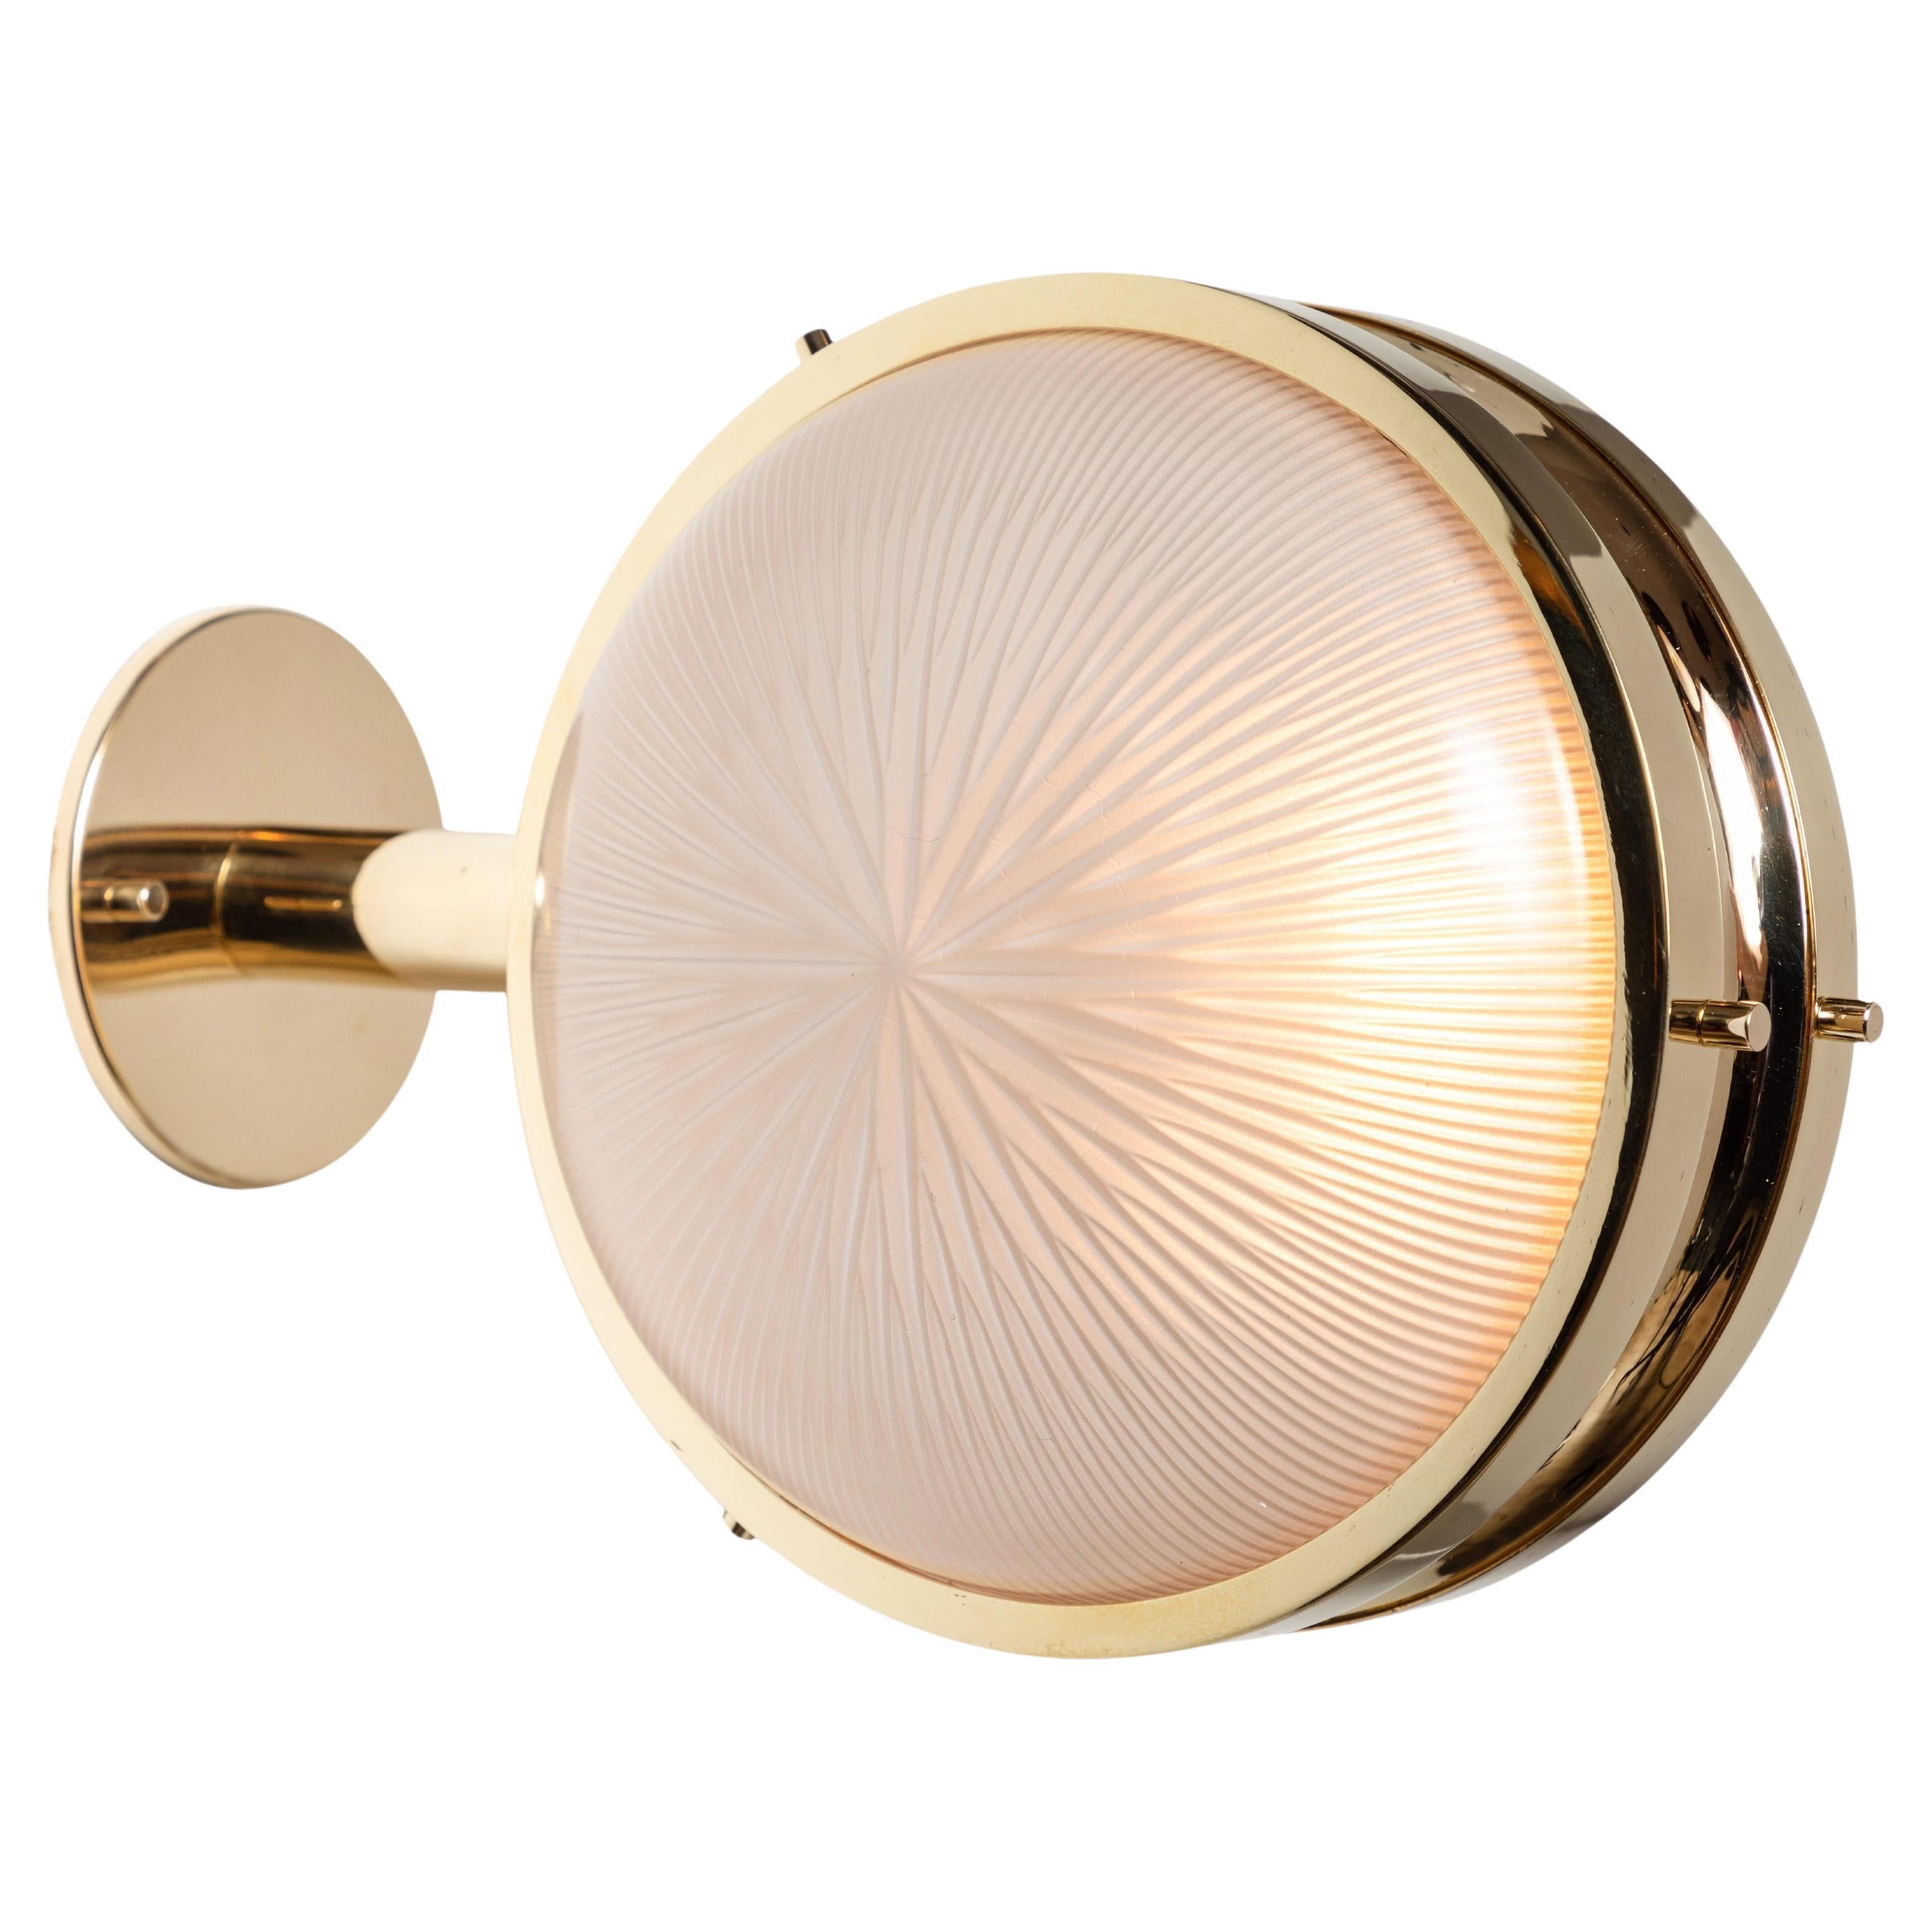 1960s Sergio Mazza Brass 'Gamma' Wall or Ceiling Light for Artemide